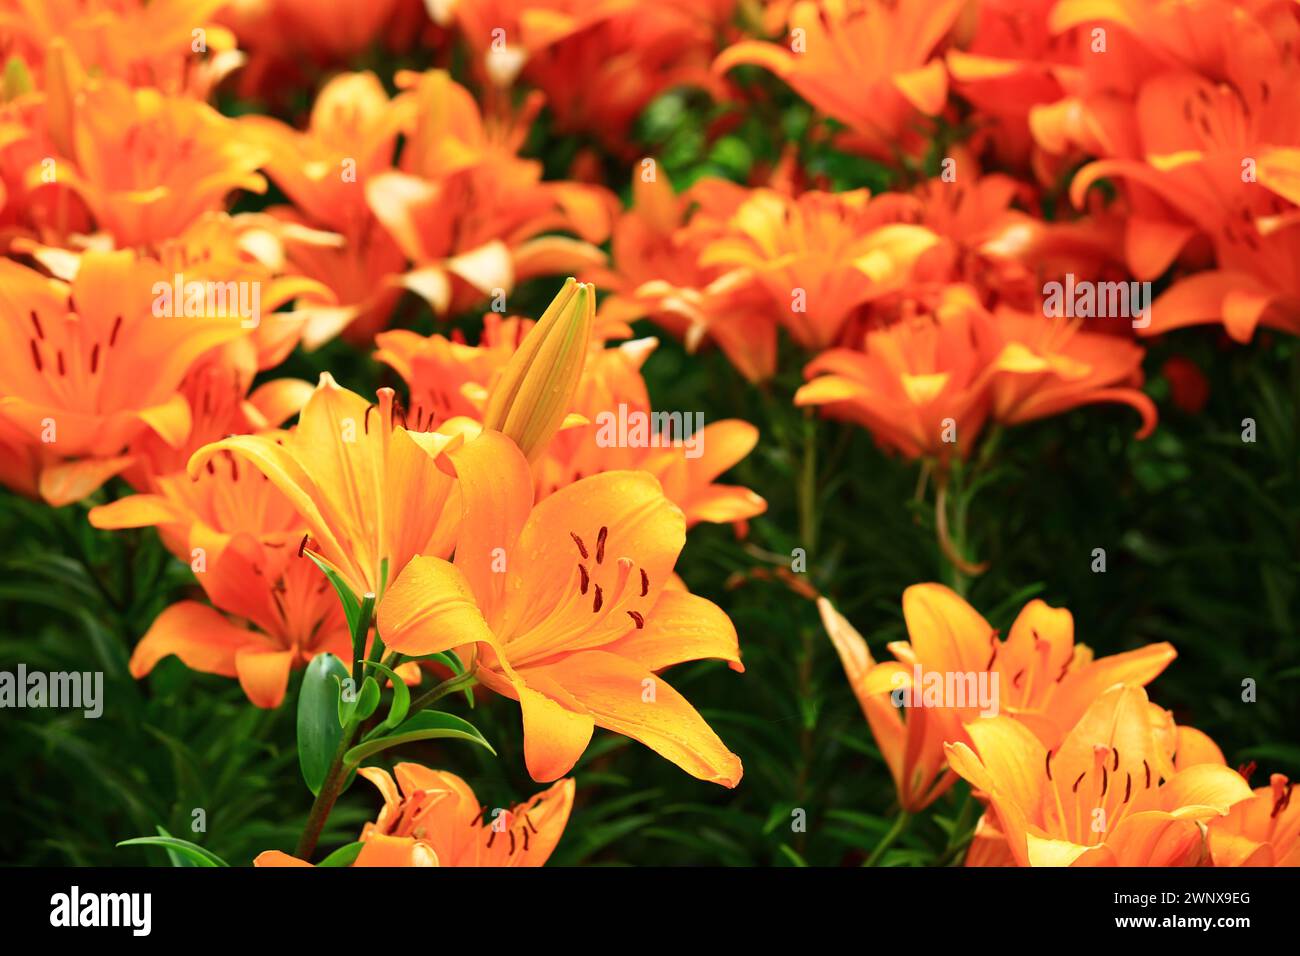 Mid-century Lily or Species Lilium or Morning Star Lily or Salisbury's Lily flowers blooming in the garden Stock Photo